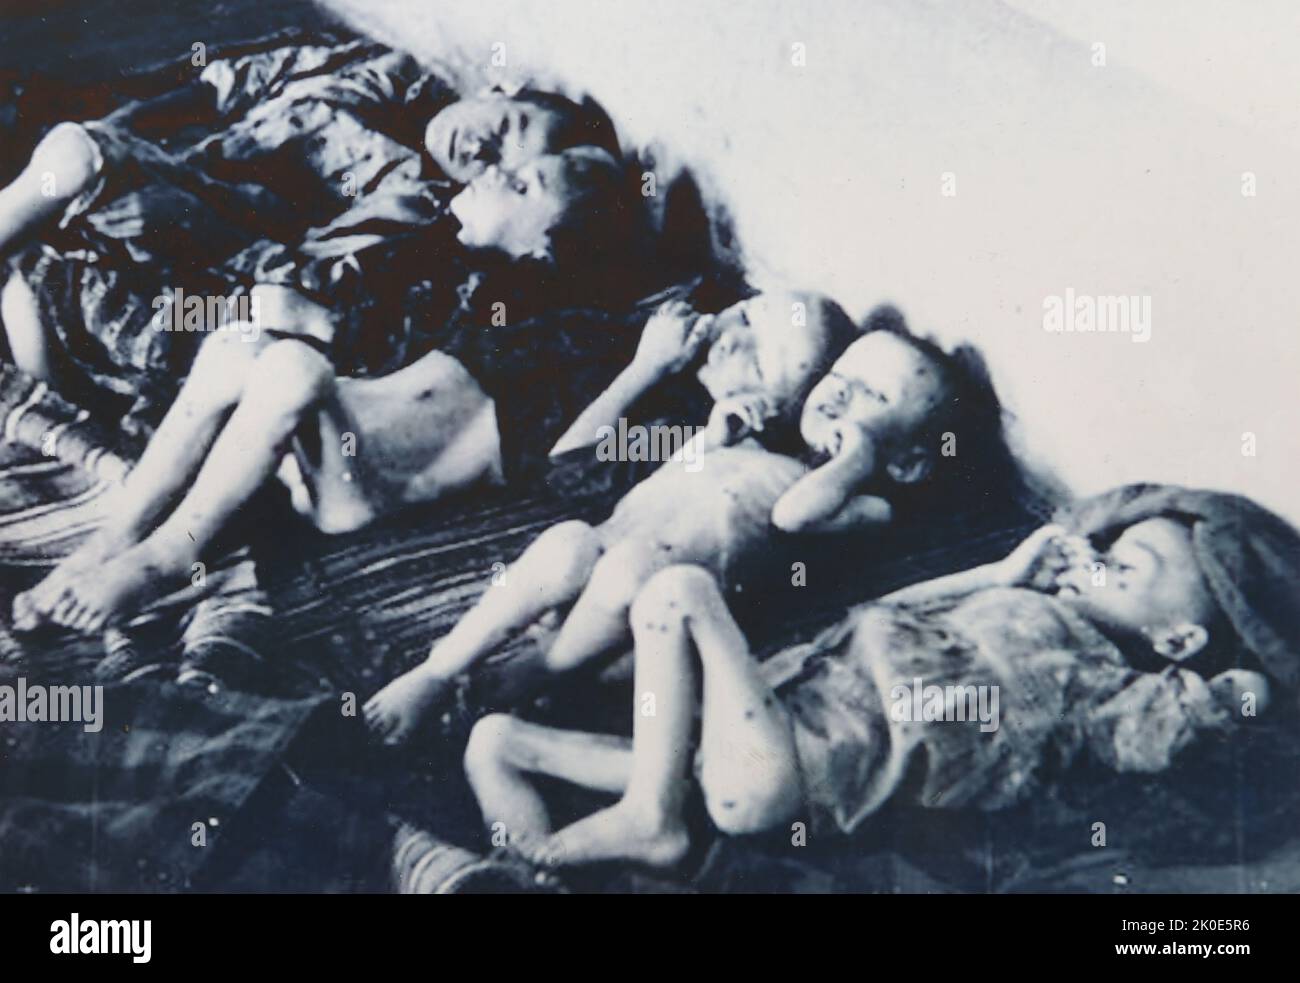 Child prisoners starve at the Ustasa controlled Jasenovac concentration camp. The Ustasa (Croatian Revolutionary Movement) or Ustase was a Croatian fascist organization, between 1929 and 1945. Jasenovac was a concentration and extermination camp established in occupied Yugoslavia during World War II. Stock Photo